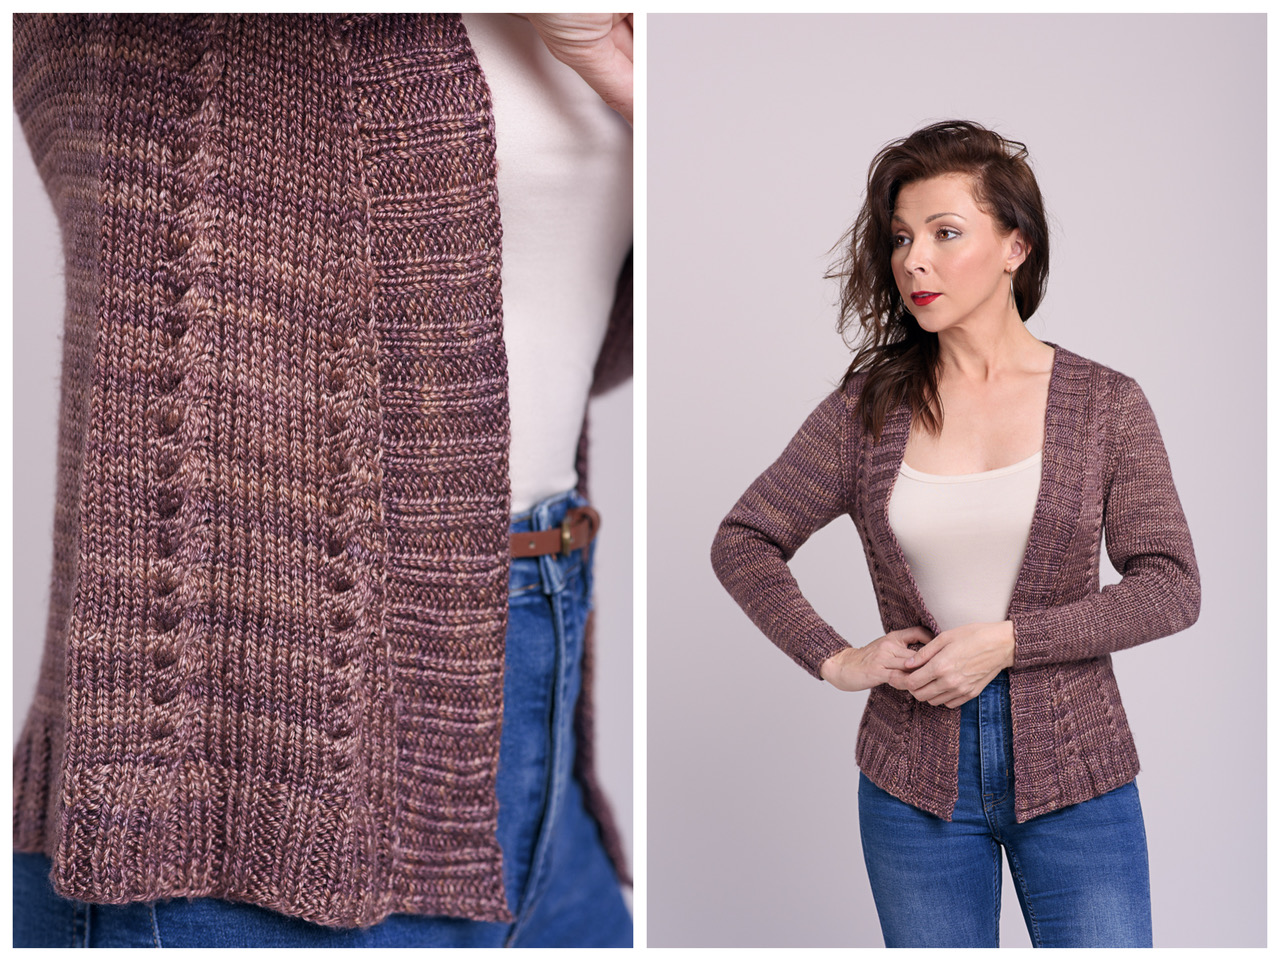 McFadden cabled knitted cardigan pattern